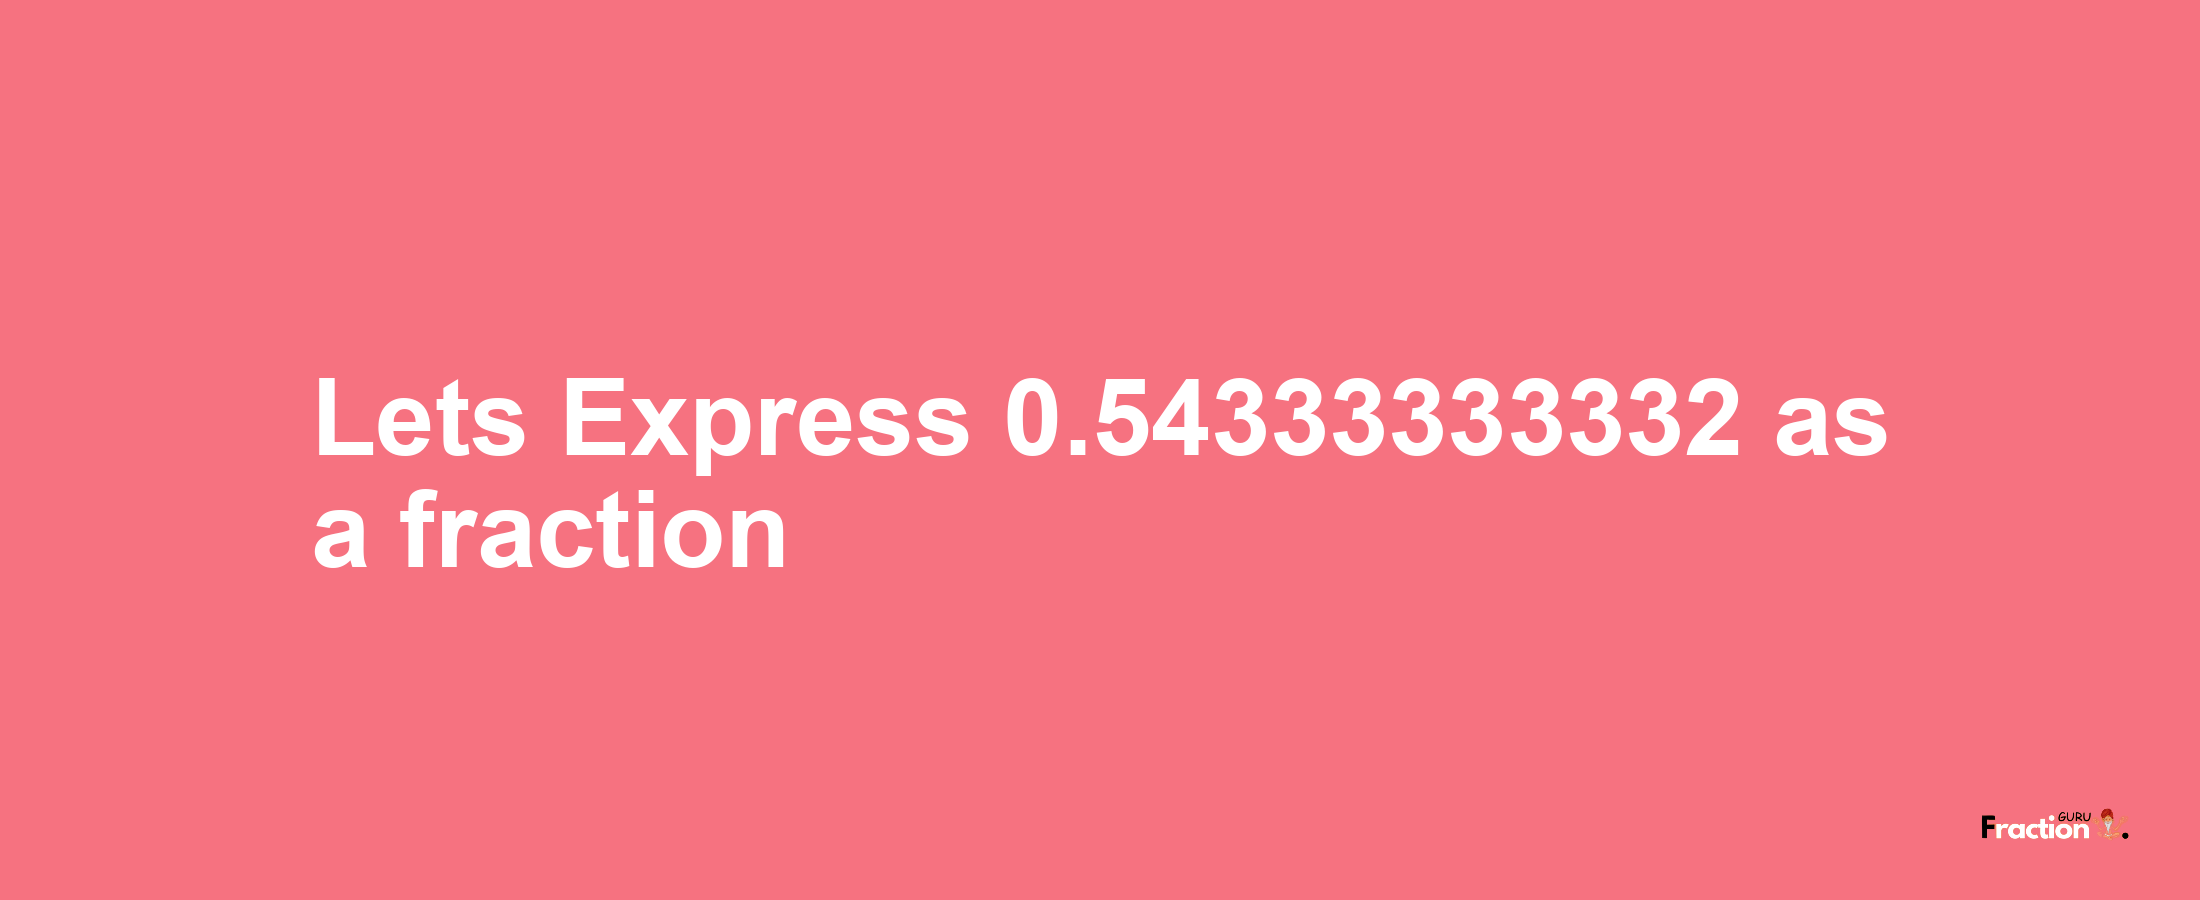 Lets Express 0.54333333332 as afraction